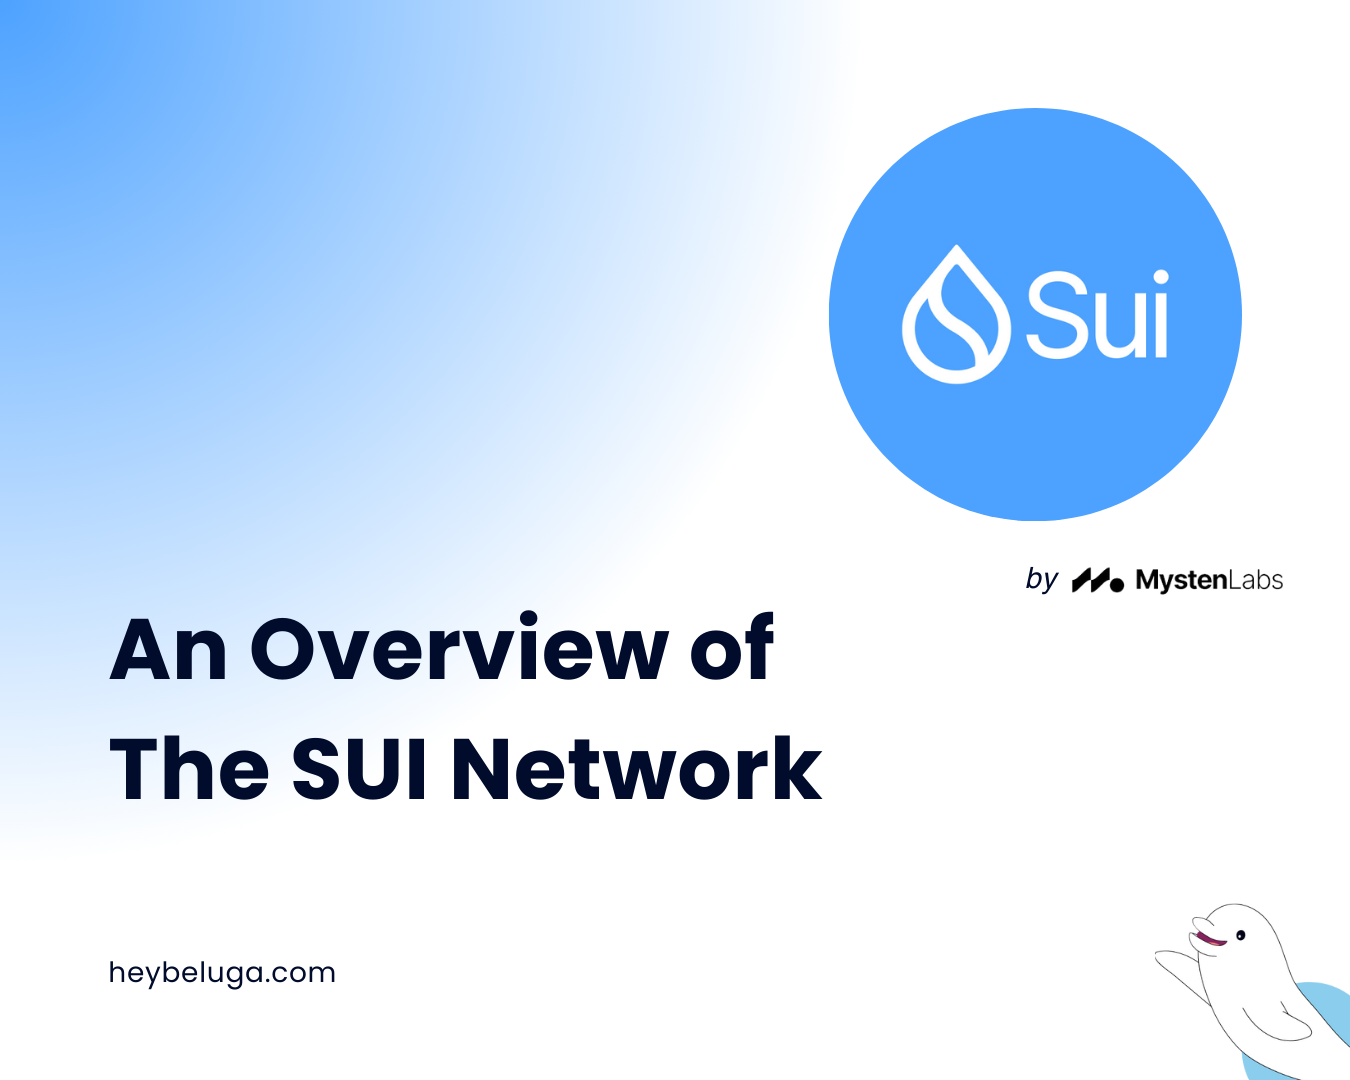 Image for An Overview of the Sui Network